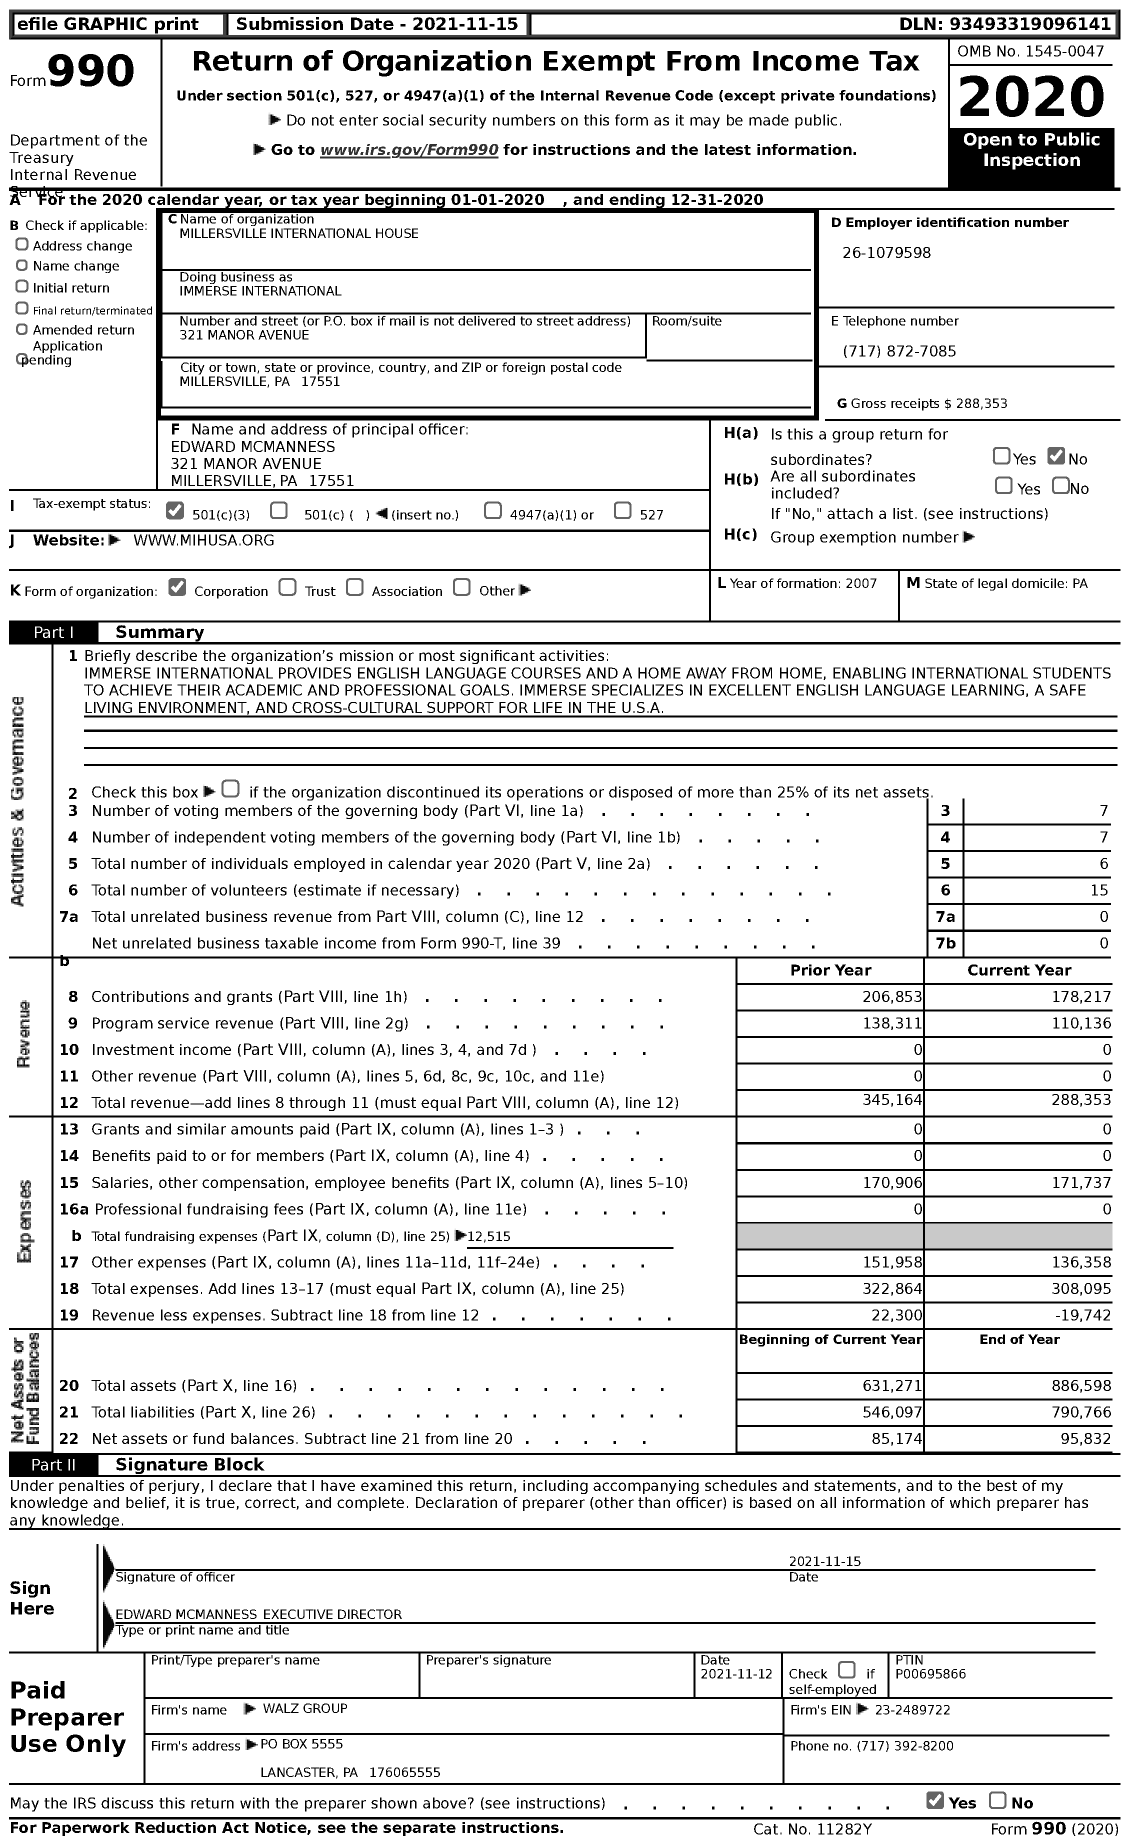 Image of first page of 2020 Form 990 for Immerse International